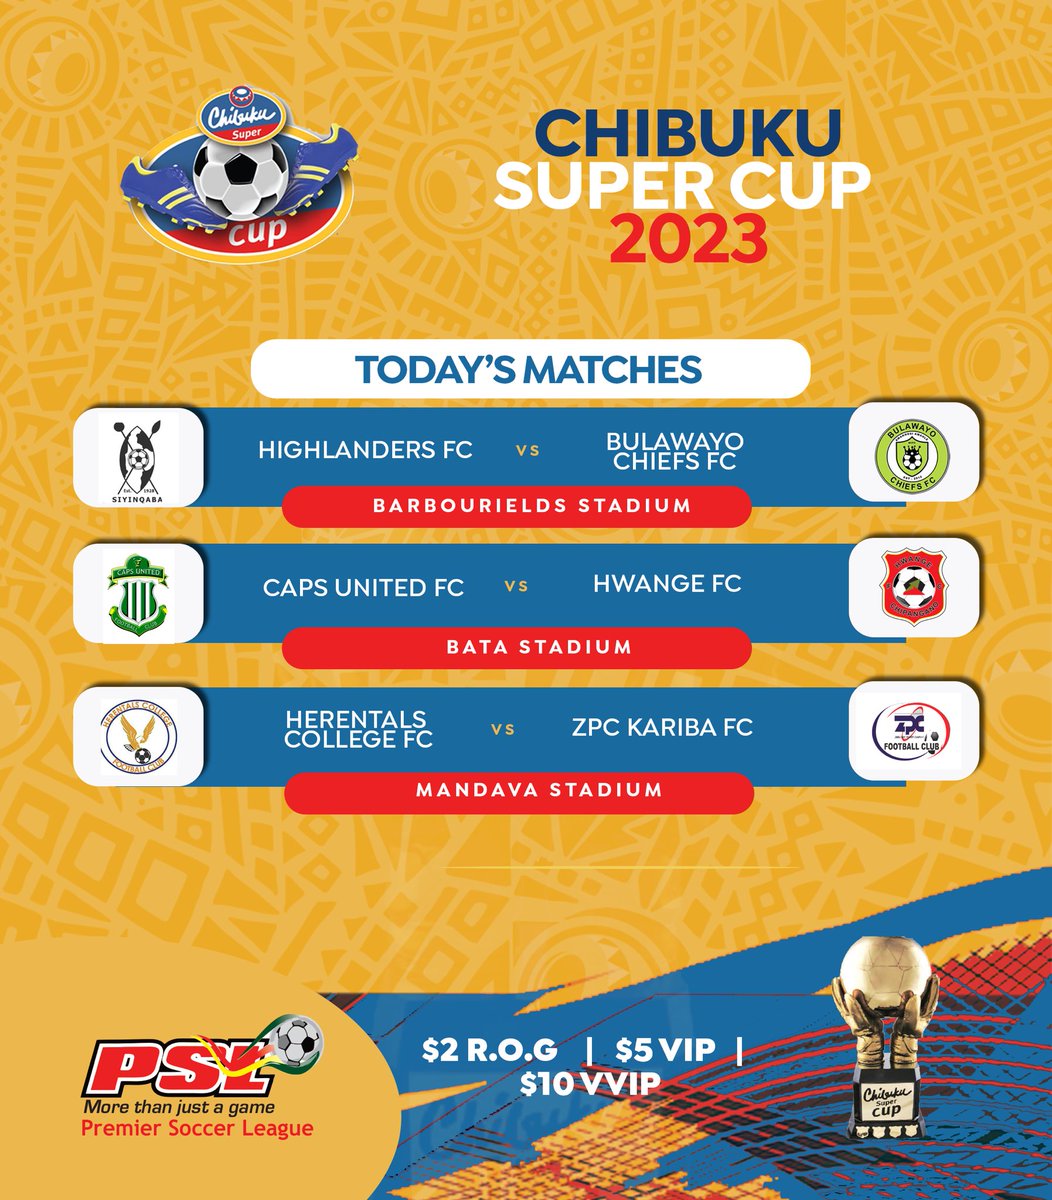 Today’s #ChibukuSuperCup matches. What’s your score prediction?